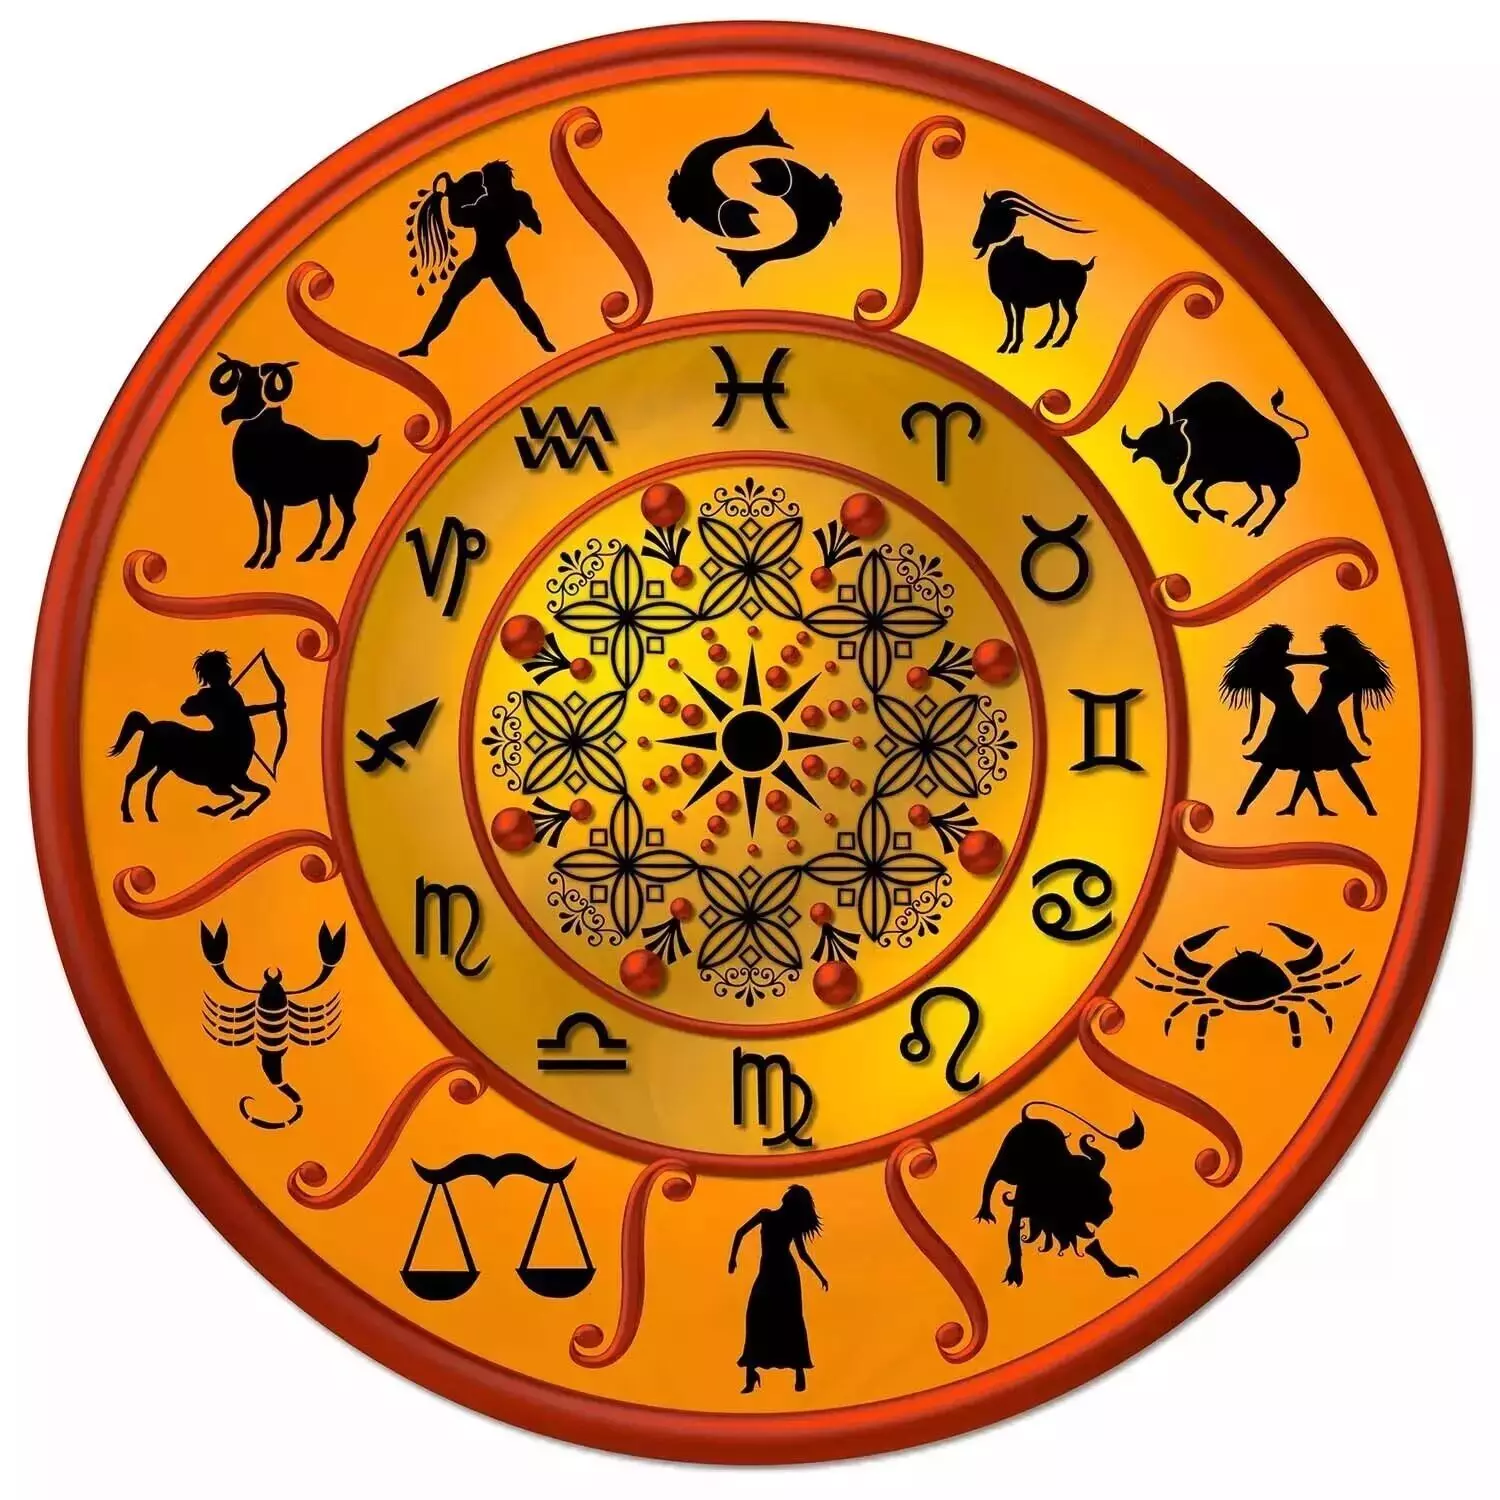 31 July  – Know your todays horoscope